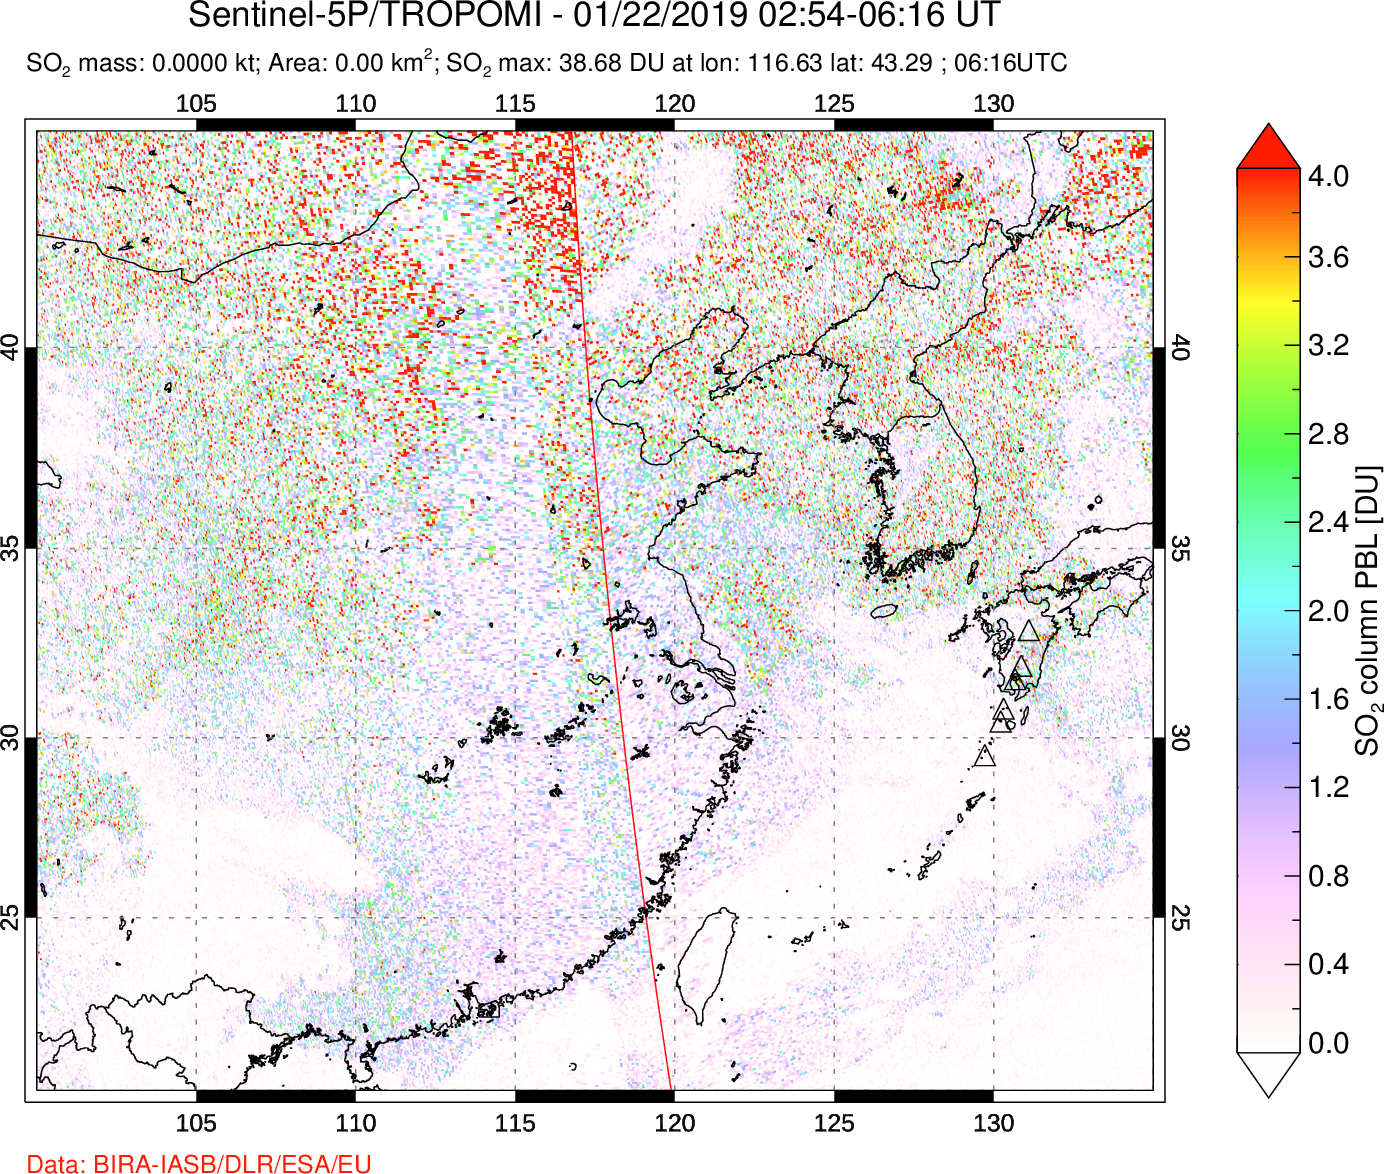 A sulfur dioxide image over Eastern China on Jan 22, 2019.